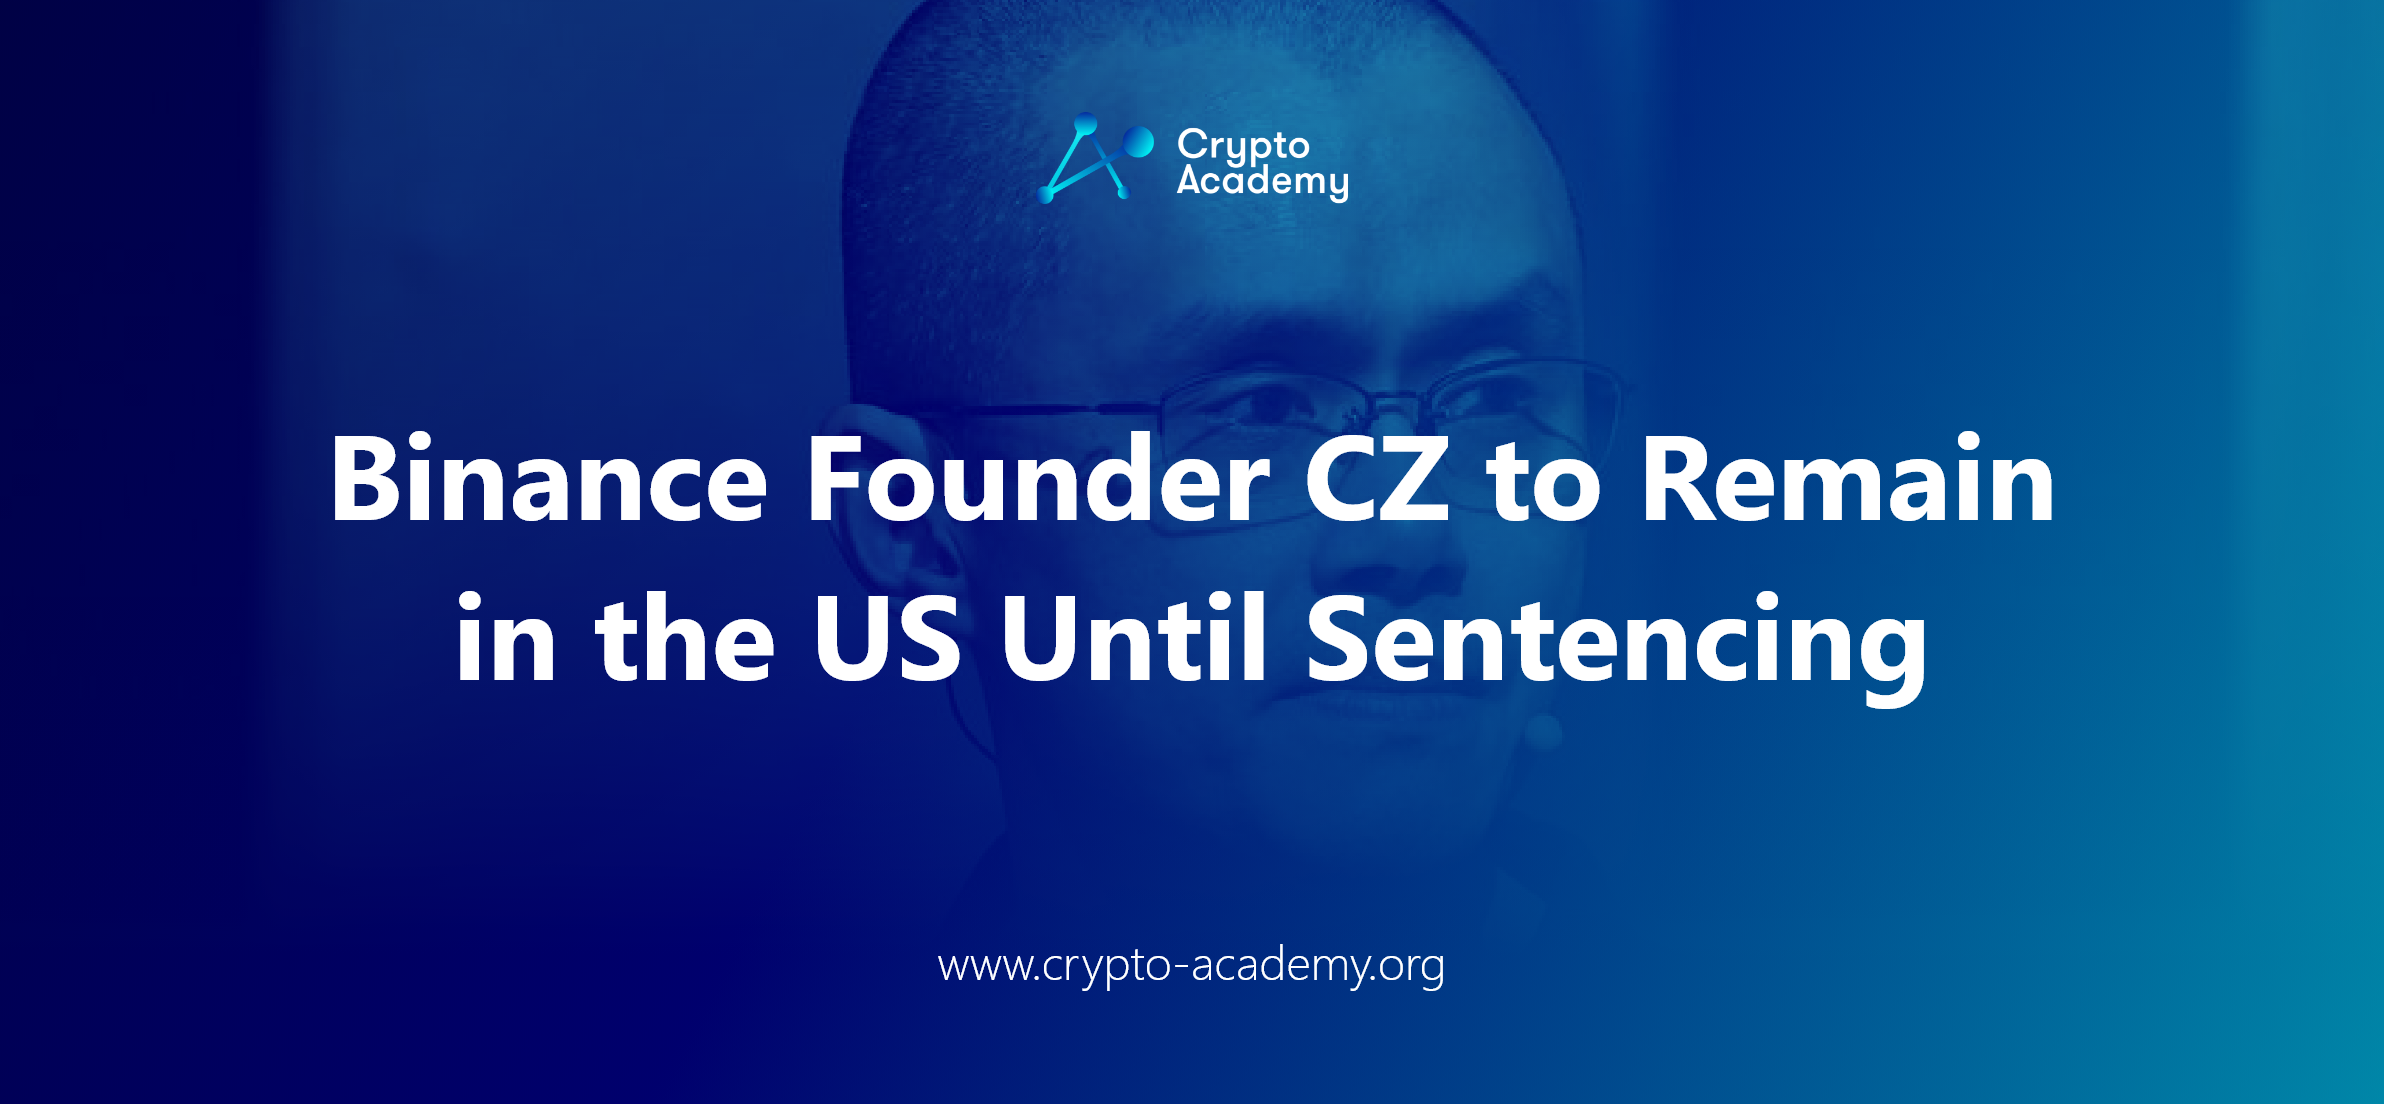 Binance Founder CZ to Remain in the US Until Sentencing